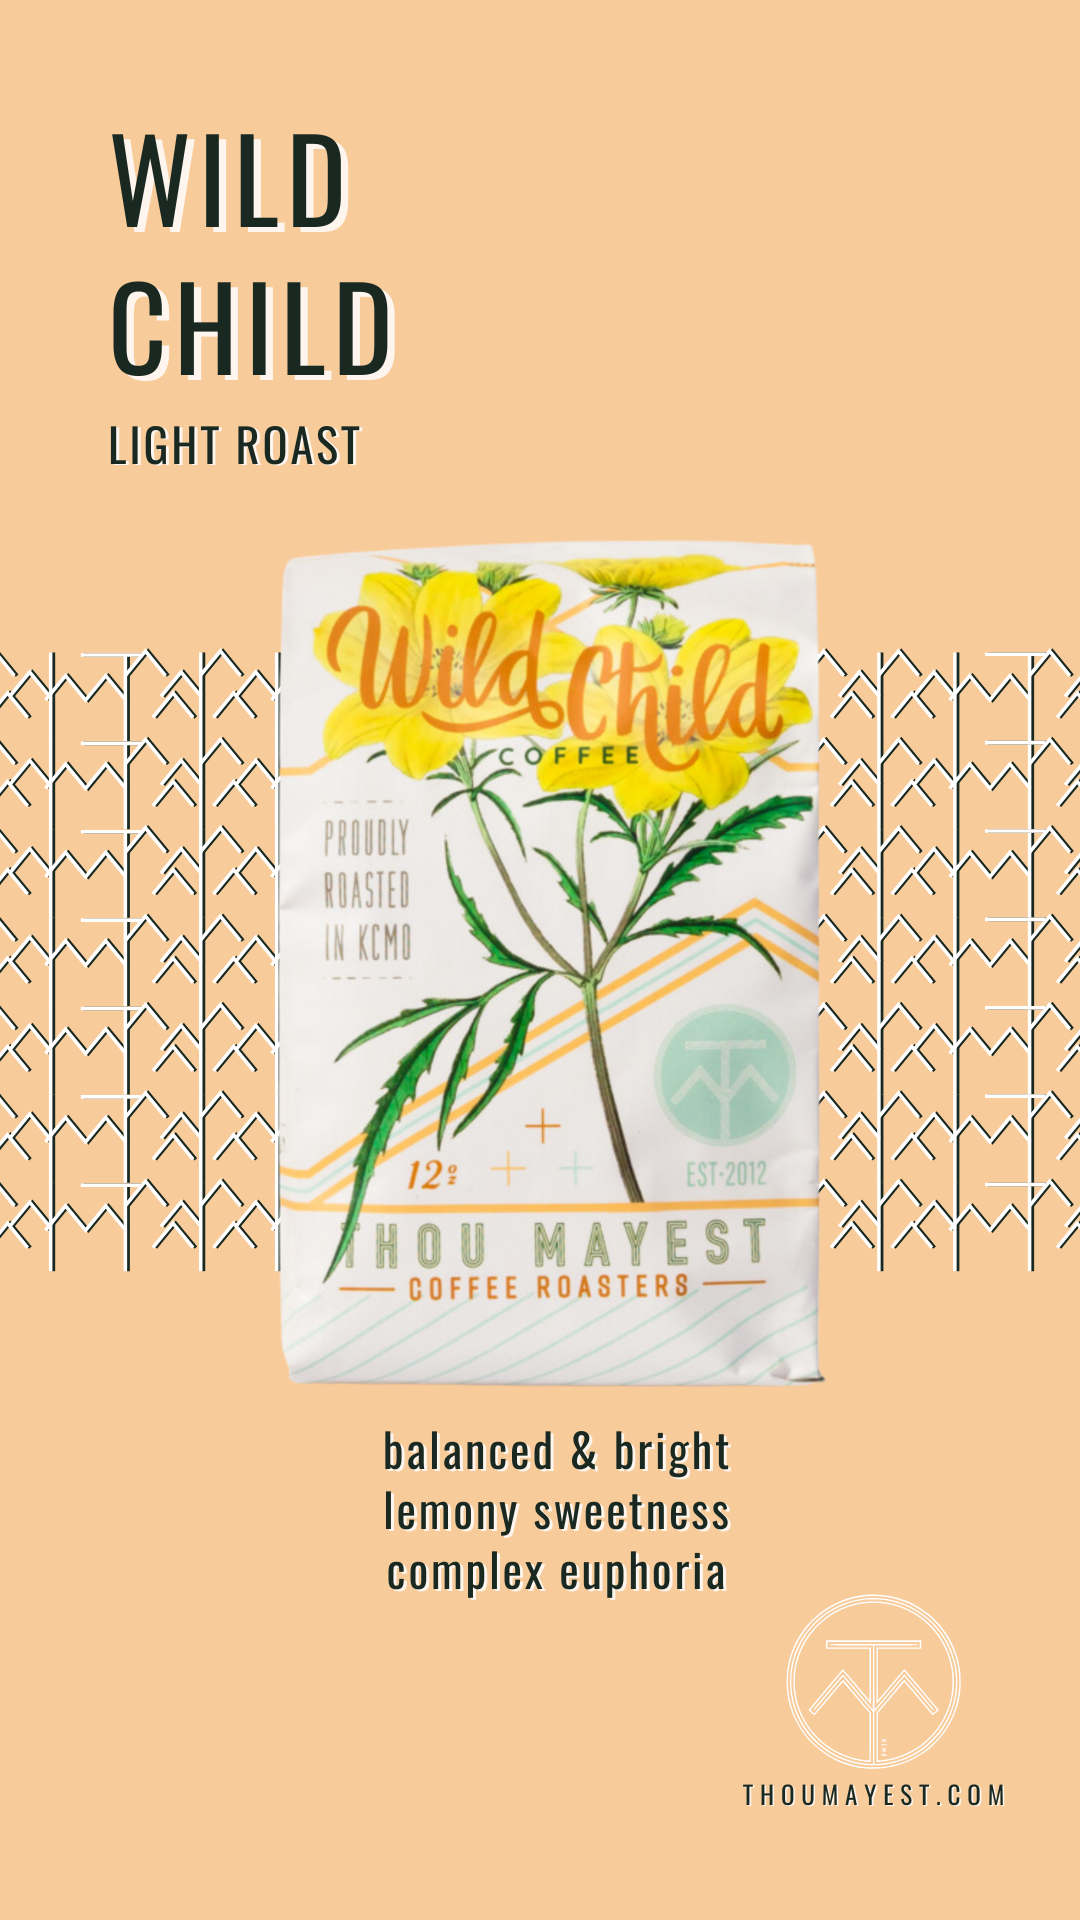 Image of our Wild Child coffee bag with description - light roast, balanced & bright, lemony sweetness, complex euphoria. Click the image to view the product page.